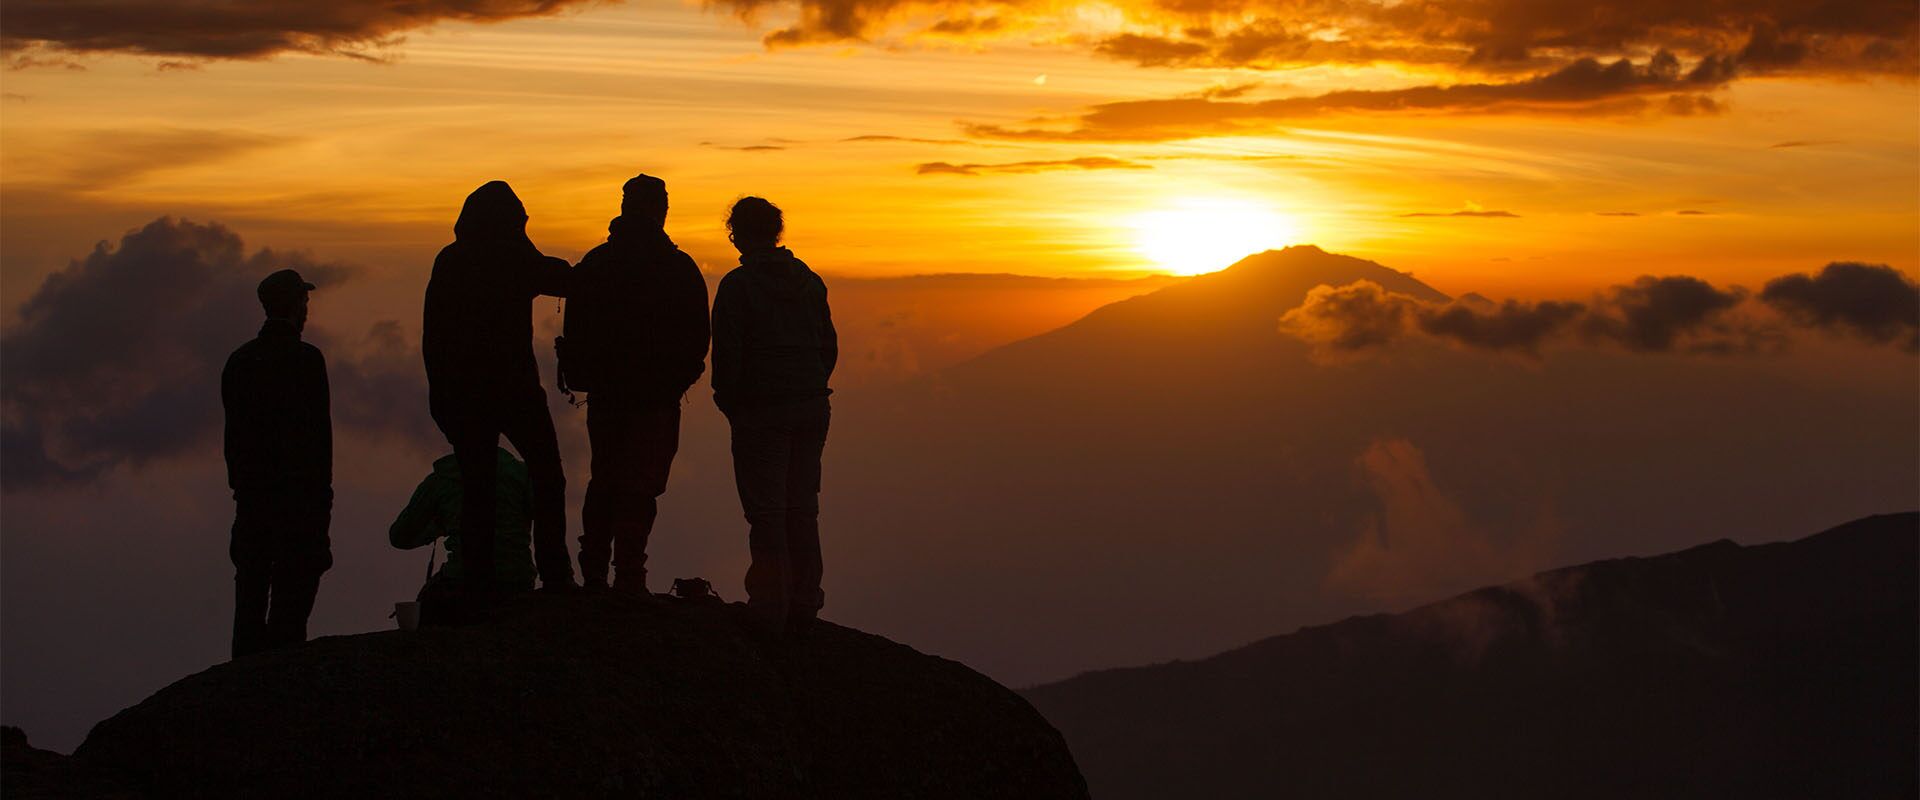 A group of hikers standing on Mount Kilimanjaro during sunset